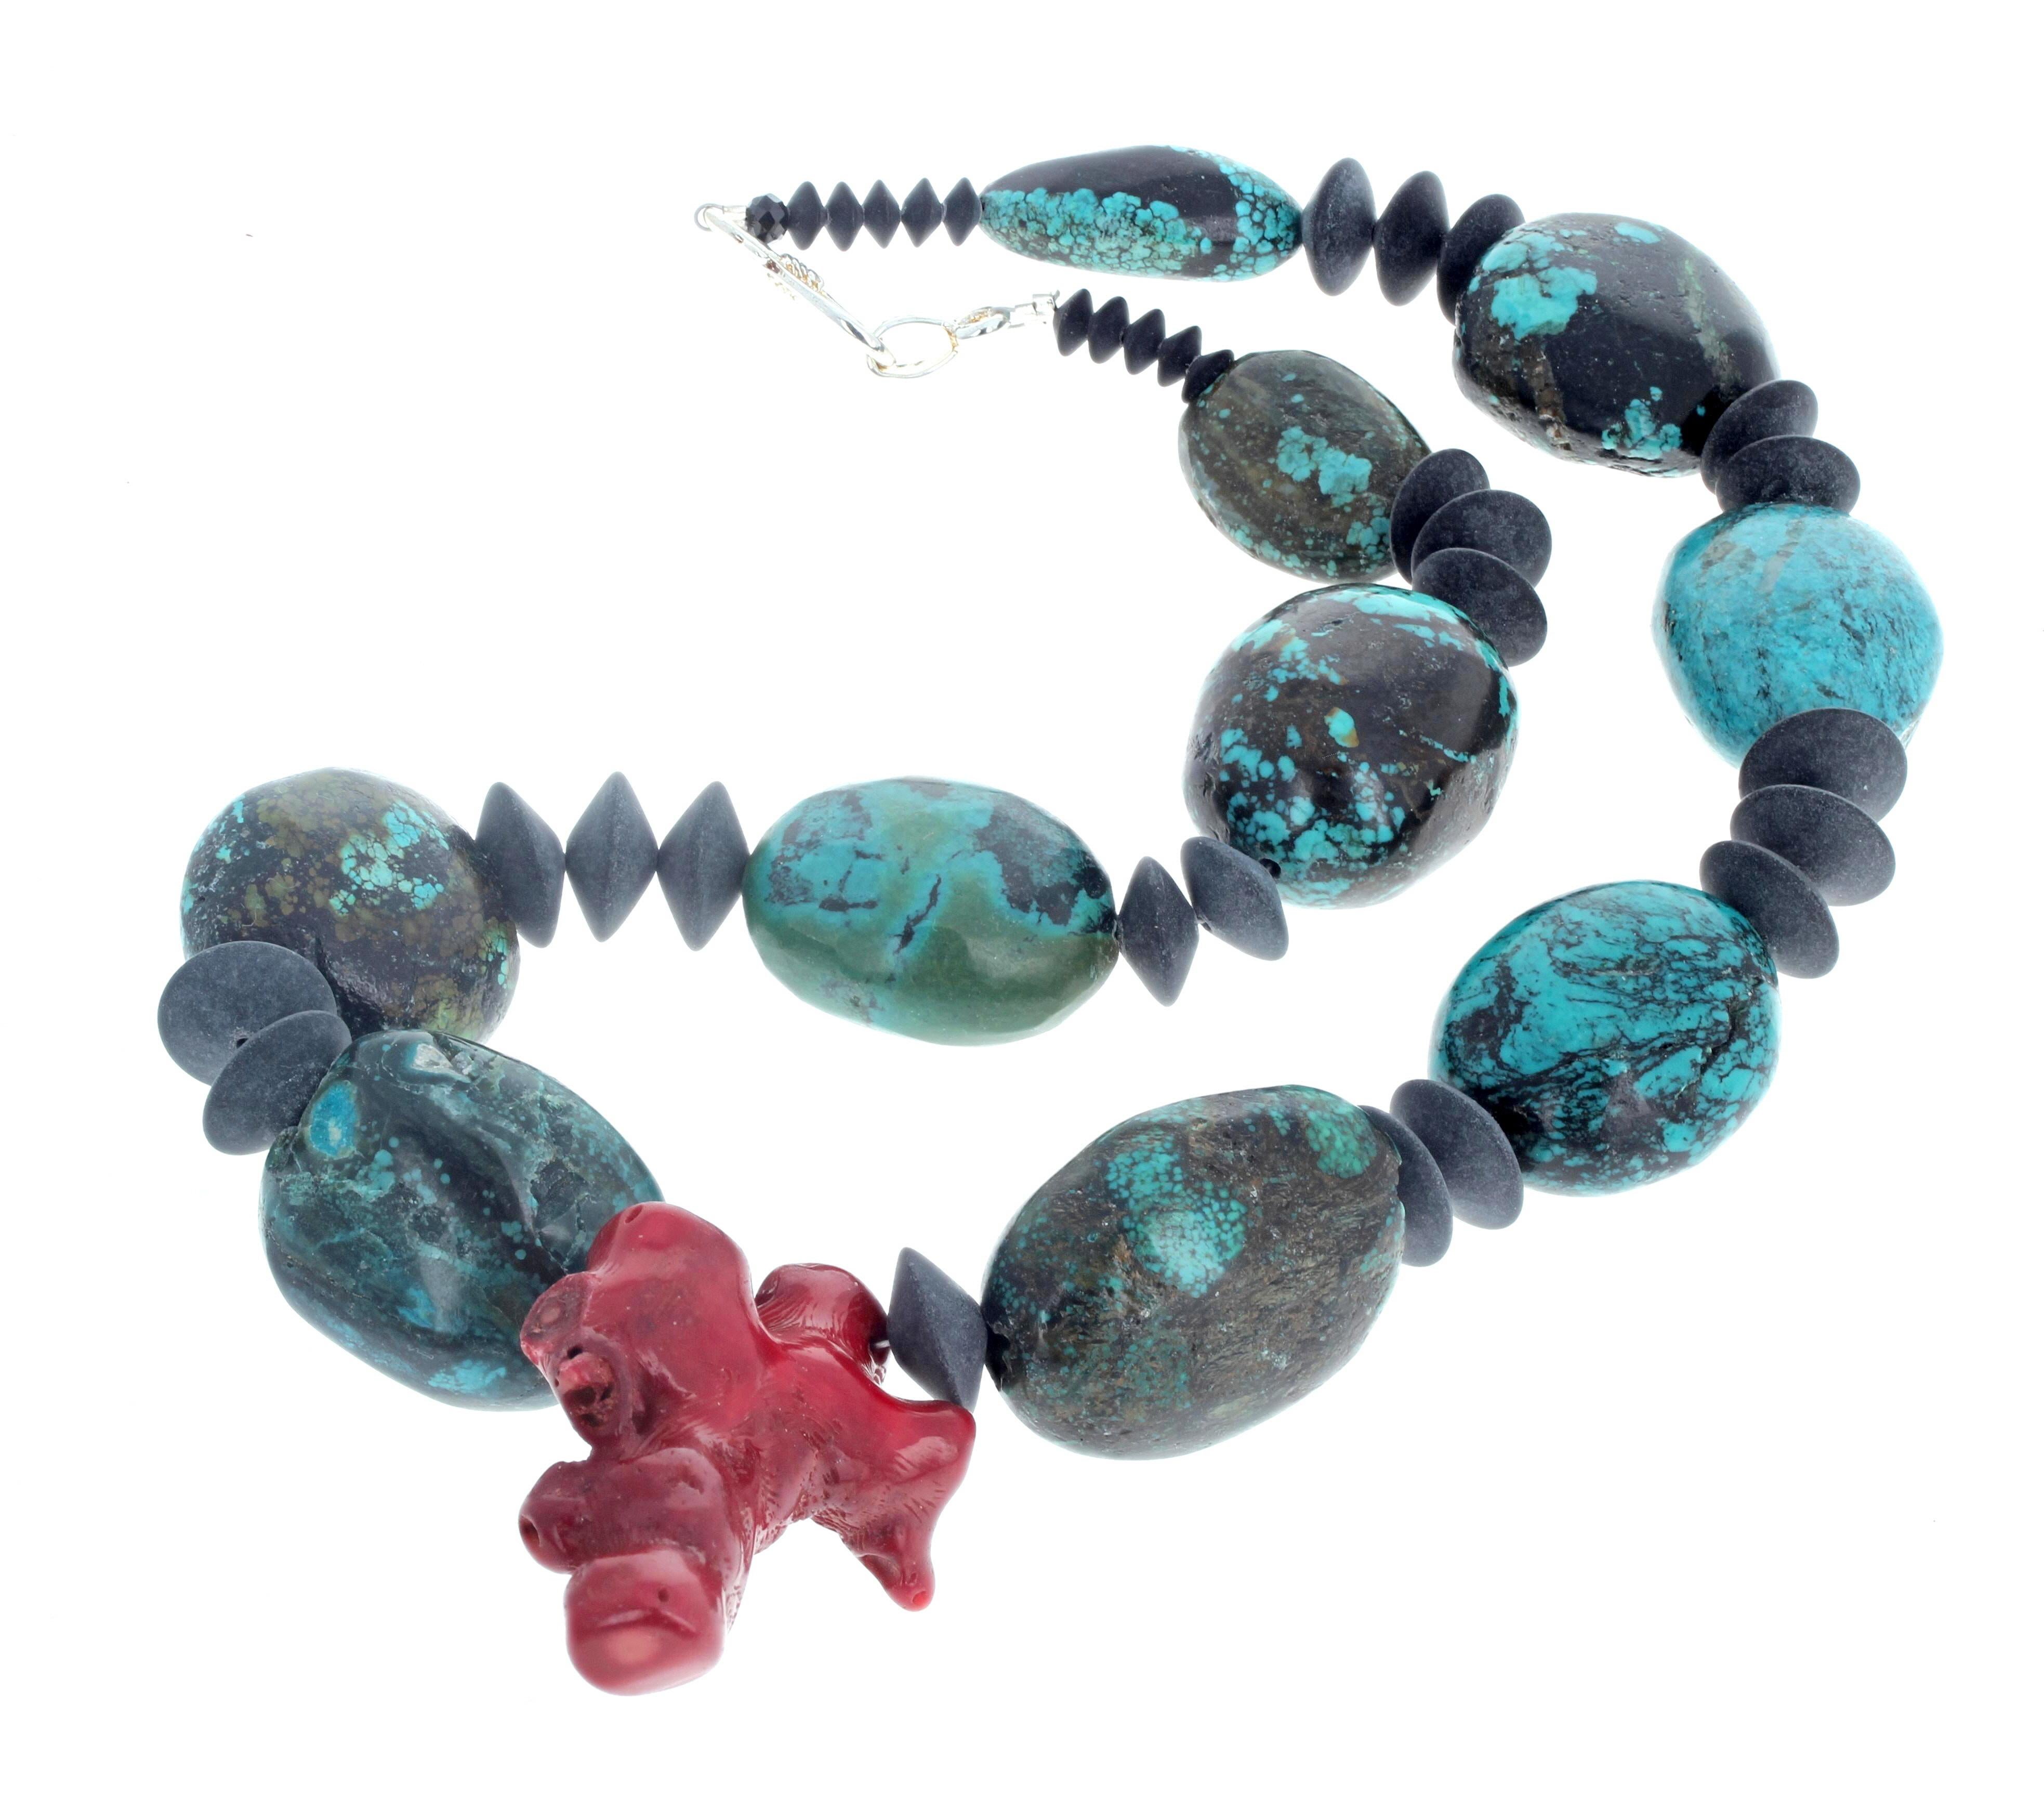 This fascinating statement real natural Turquoise is enhanced with large black Onyx rondels and swings a magnificent red Coral pendant in its center. The beautiful Tuquoise are approximately 30mm x 27mm and the largest Onyx are approximately 13.5mm.